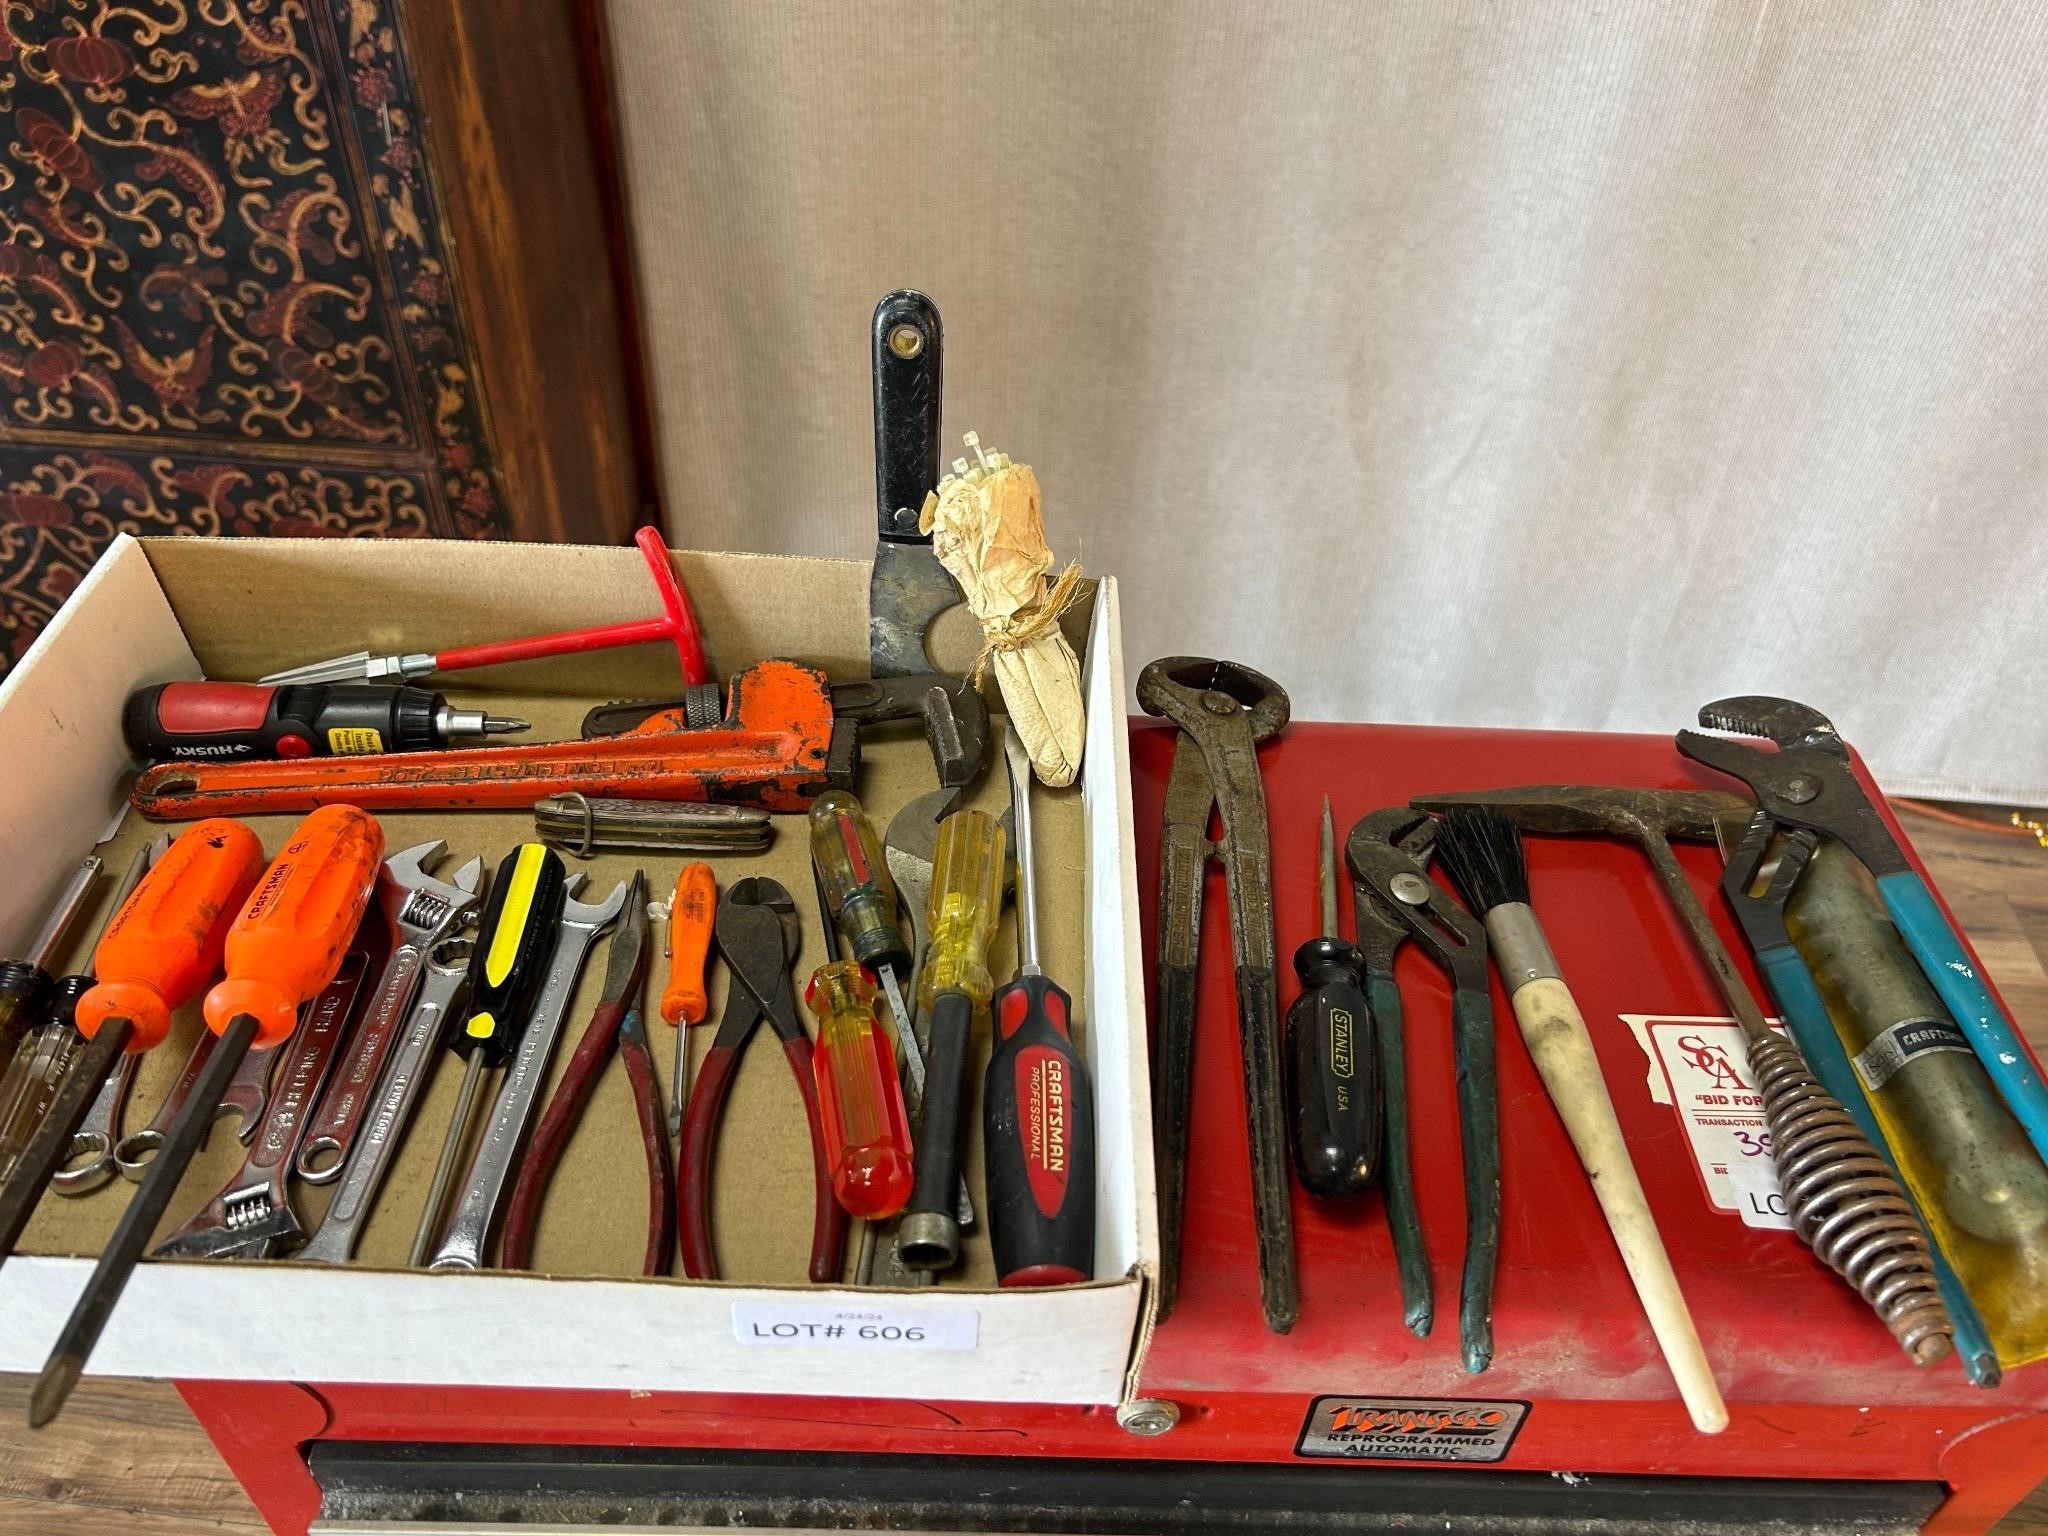 Handtools: Wrenches, Screwdriver etc